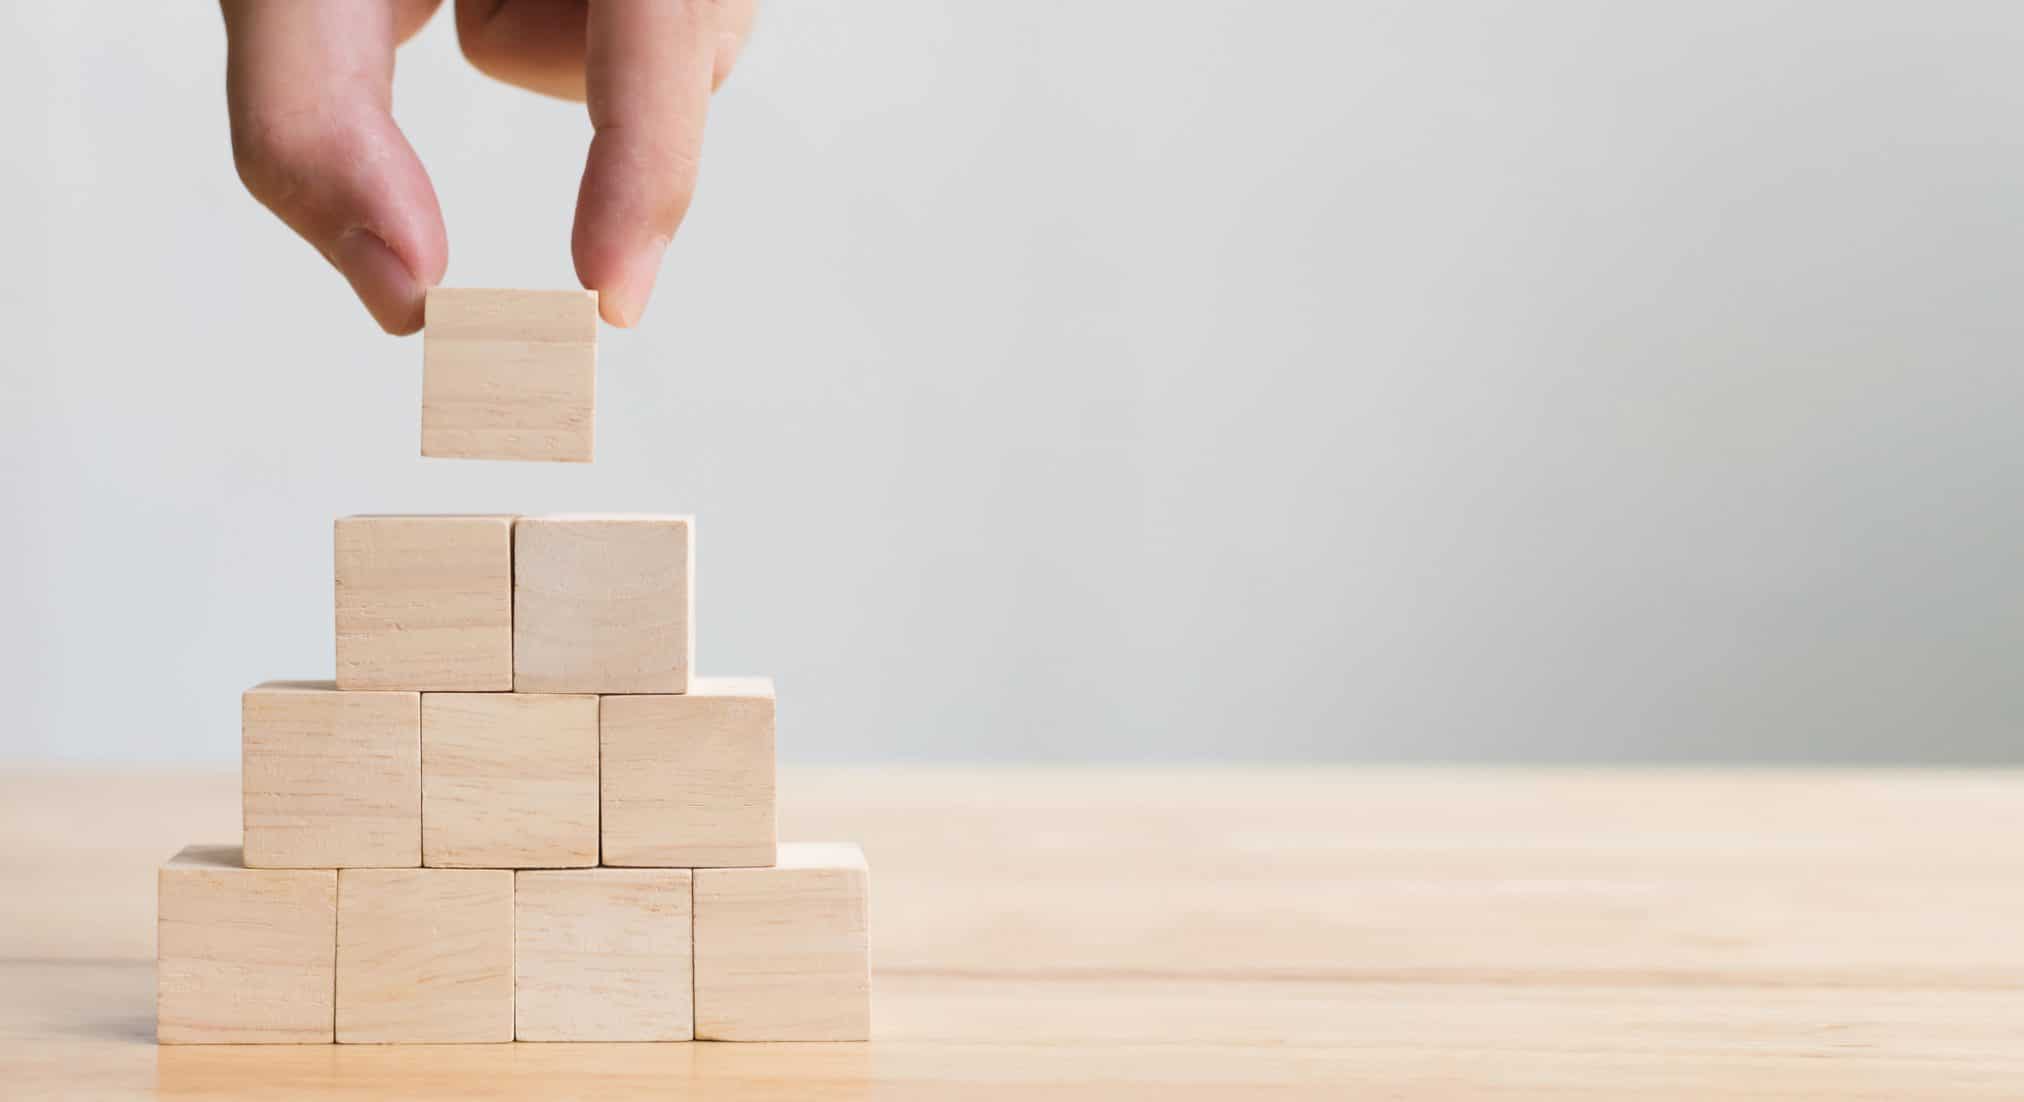 Anatomy of a Successful Campaign - Building Blocks for for a Solid Foundation